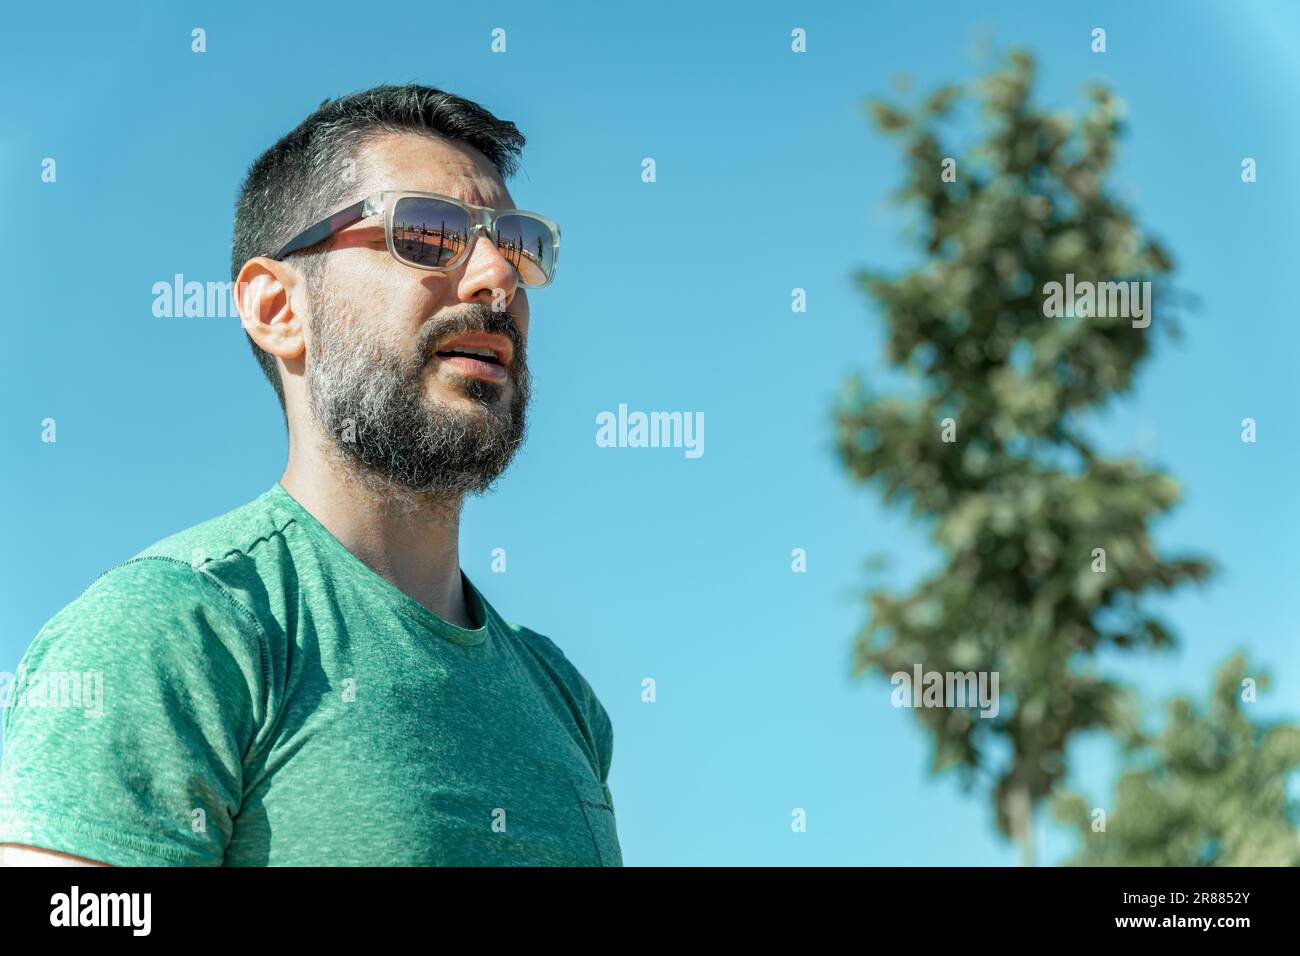 Attractive young man with beard and sunglasses in profile wearing a green t-shirt looking at the sun with a tree in the background Stock Photo